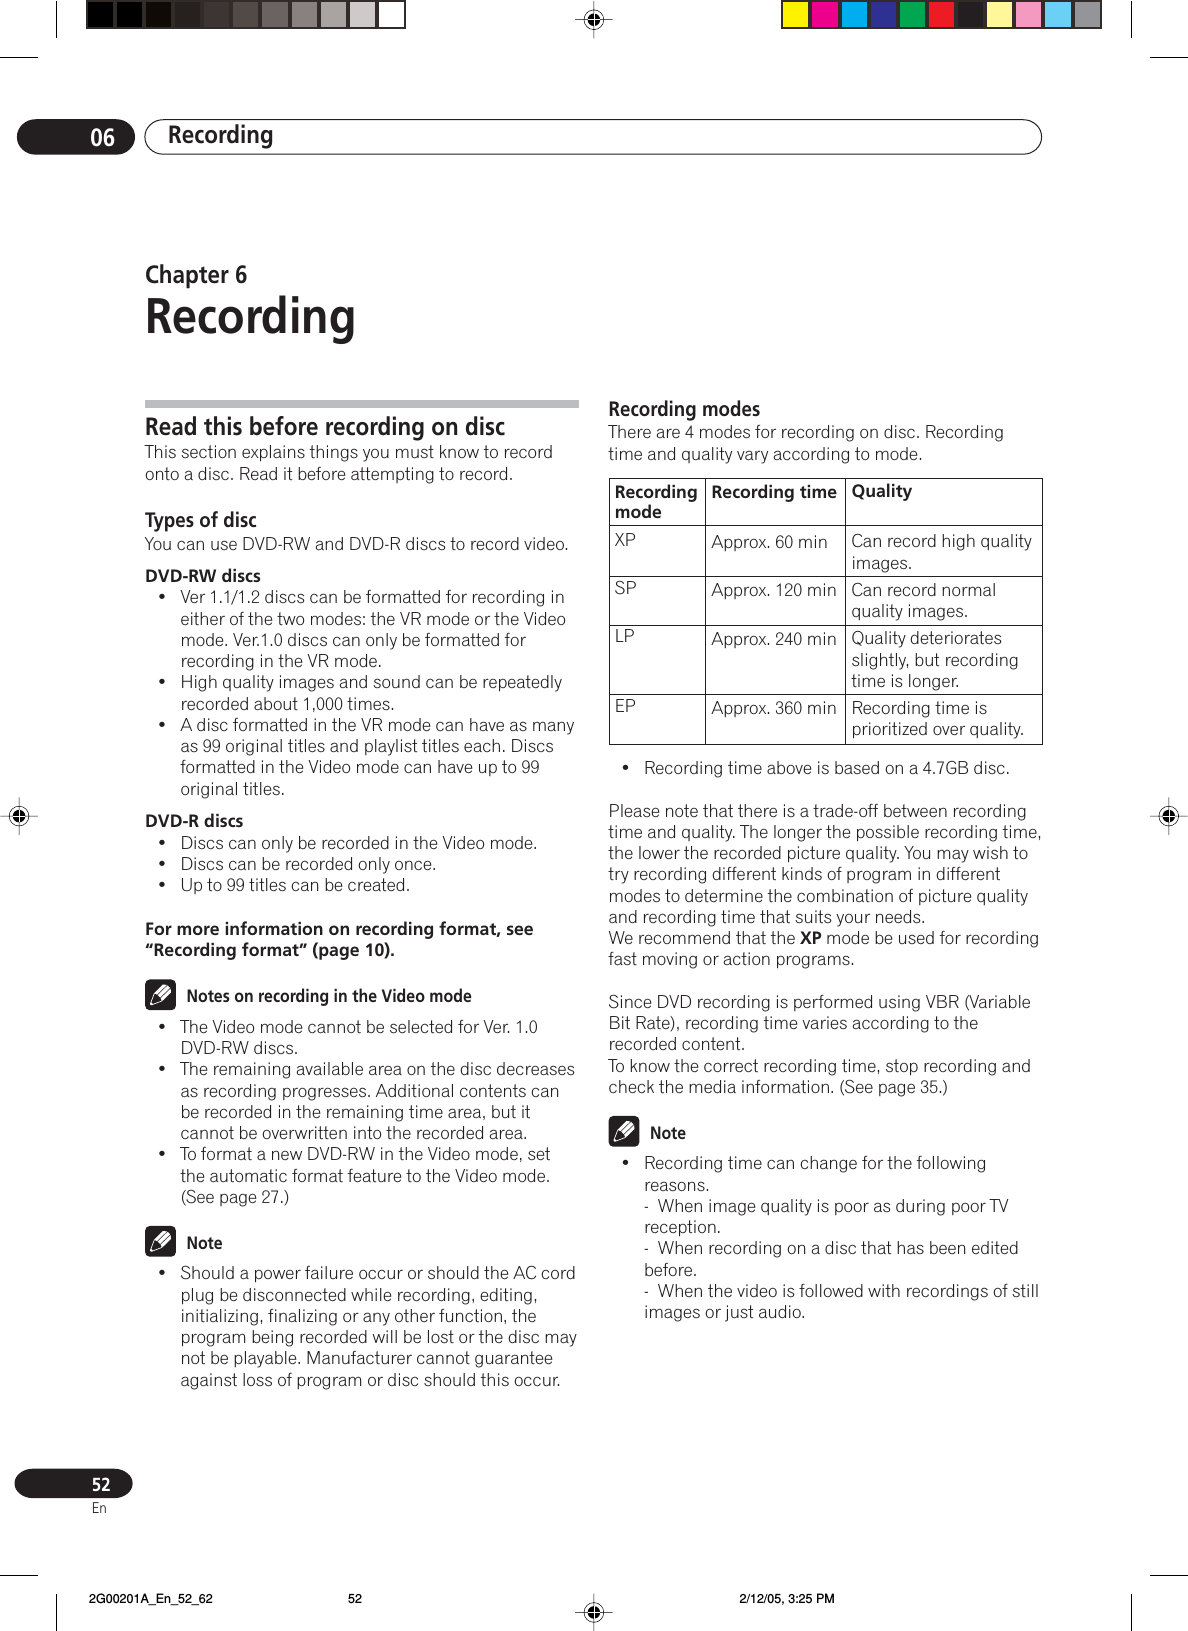 Recording0652EnRead this before recording on discThis section explains things you must know to recordonto a disc. Read it before attempting to record.Types of discYou can use DVD-RW and DVD-R discs to record video.DVD-RW discs• Ver 1.1/1.2 discs can be formatted for recording ineither of the two modes: the VR mode or the Videomode. Ver.1.0 discs can only be formatted forrecording in the VR mode.• High quality images and sound can be repeatedlyrecorded about 1,000 times.• A disc formatted in the VR mode can have as manyas 99 original titles and playlist titles each. Discsformatted in the Video mode can have up to 99original titles.DVD-R discs• Discs can only be recorded in the Video mode.• Discs can be recorded only once.• Up to 99 titles can be created.For more information on recording format, see“Recording format” (page 10).Notes on recording in the Video mode• The Video mode cannot be selected for Ver. 1.0DVD-RW discs.• The remaining available area on the disc decreasesas recording progresses. Additional contents canbe recorded in the remaining time area, but itcannot be overwritten into the recorded area.• To format a new DVD-RW in the Video mode, setthe automatic format feature to the Video mode.(See page 27.)Note• Should a power failure occur or should the AC cordplug be disconnected while recording, editing,initializing, finalizing or any other function, theprogram being recorded will be lost or the disc maynot be playable. Manufacturer cannot guaranteeagainst loss of program or disc should this occur.Chapter 6RecordingRecordingmodeXPSPLPEPRecording timeApprox. 60 minApprox. 120 minApprox. 240 minApprox. 360 minQualityCan record high qualityimages.Can record normalquality images.Quality deterioratesslightly, but recordingtime is longer.Recording time isprioritized over quality.Recording modesThere are 4 modes for recording on disc. Recordingtime and quality vary according to mode.• Recording time above is based on a 4.7GB disc.Please note that there is a trade-off between recordingtime and quality. The longer the possible recording time,the lower the recorded picture quality. You may wish totry recording different kinds of program in differentmodes to determine the combination of picture qualityand recording time that suits your needs.We recommend that the XP mode be used for recordingfast moving or action programs.Since DVD recording is performed using VBR (VariableBit Rate), recording time varies according to therecorded content.To know the correct recording time, stop recording andcheck the media information. (See page 35.)Note• Recording time can change for the followingreasons.-  When image quality is poor as during poor TVreception.-  When recording on a disc that has been editedbefore.-  When the video is followed with recordings of stillimages or just audio. 2G00201A_En_52_62 2/12/05, 3:25 PM52